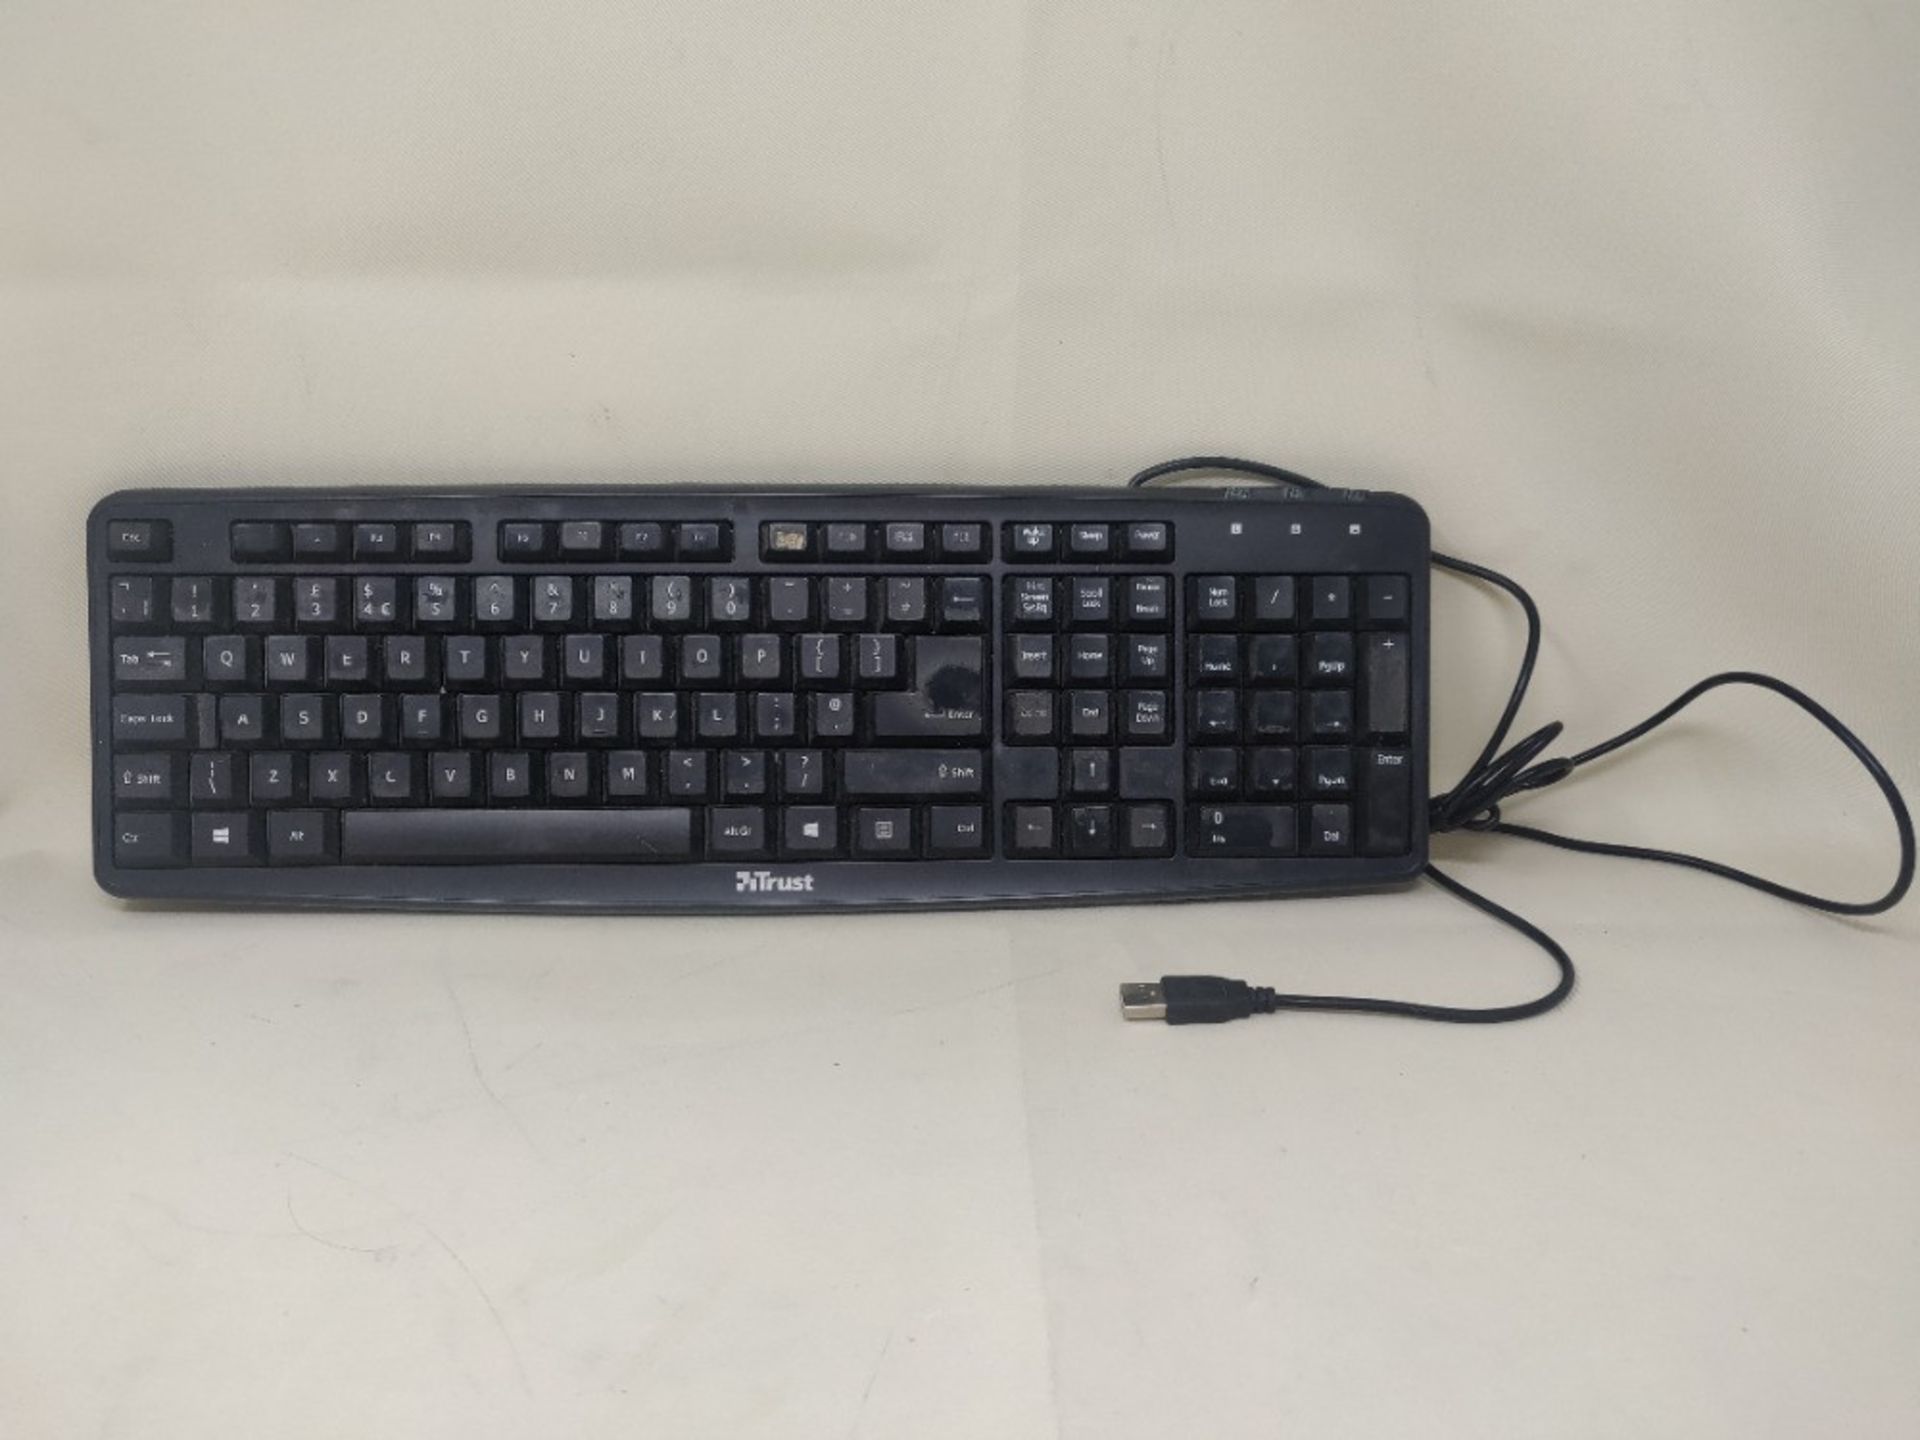 Rapoo N2400 Wired Spill-resistant Keyboard, Black, UK Layout - Image 3 of 3